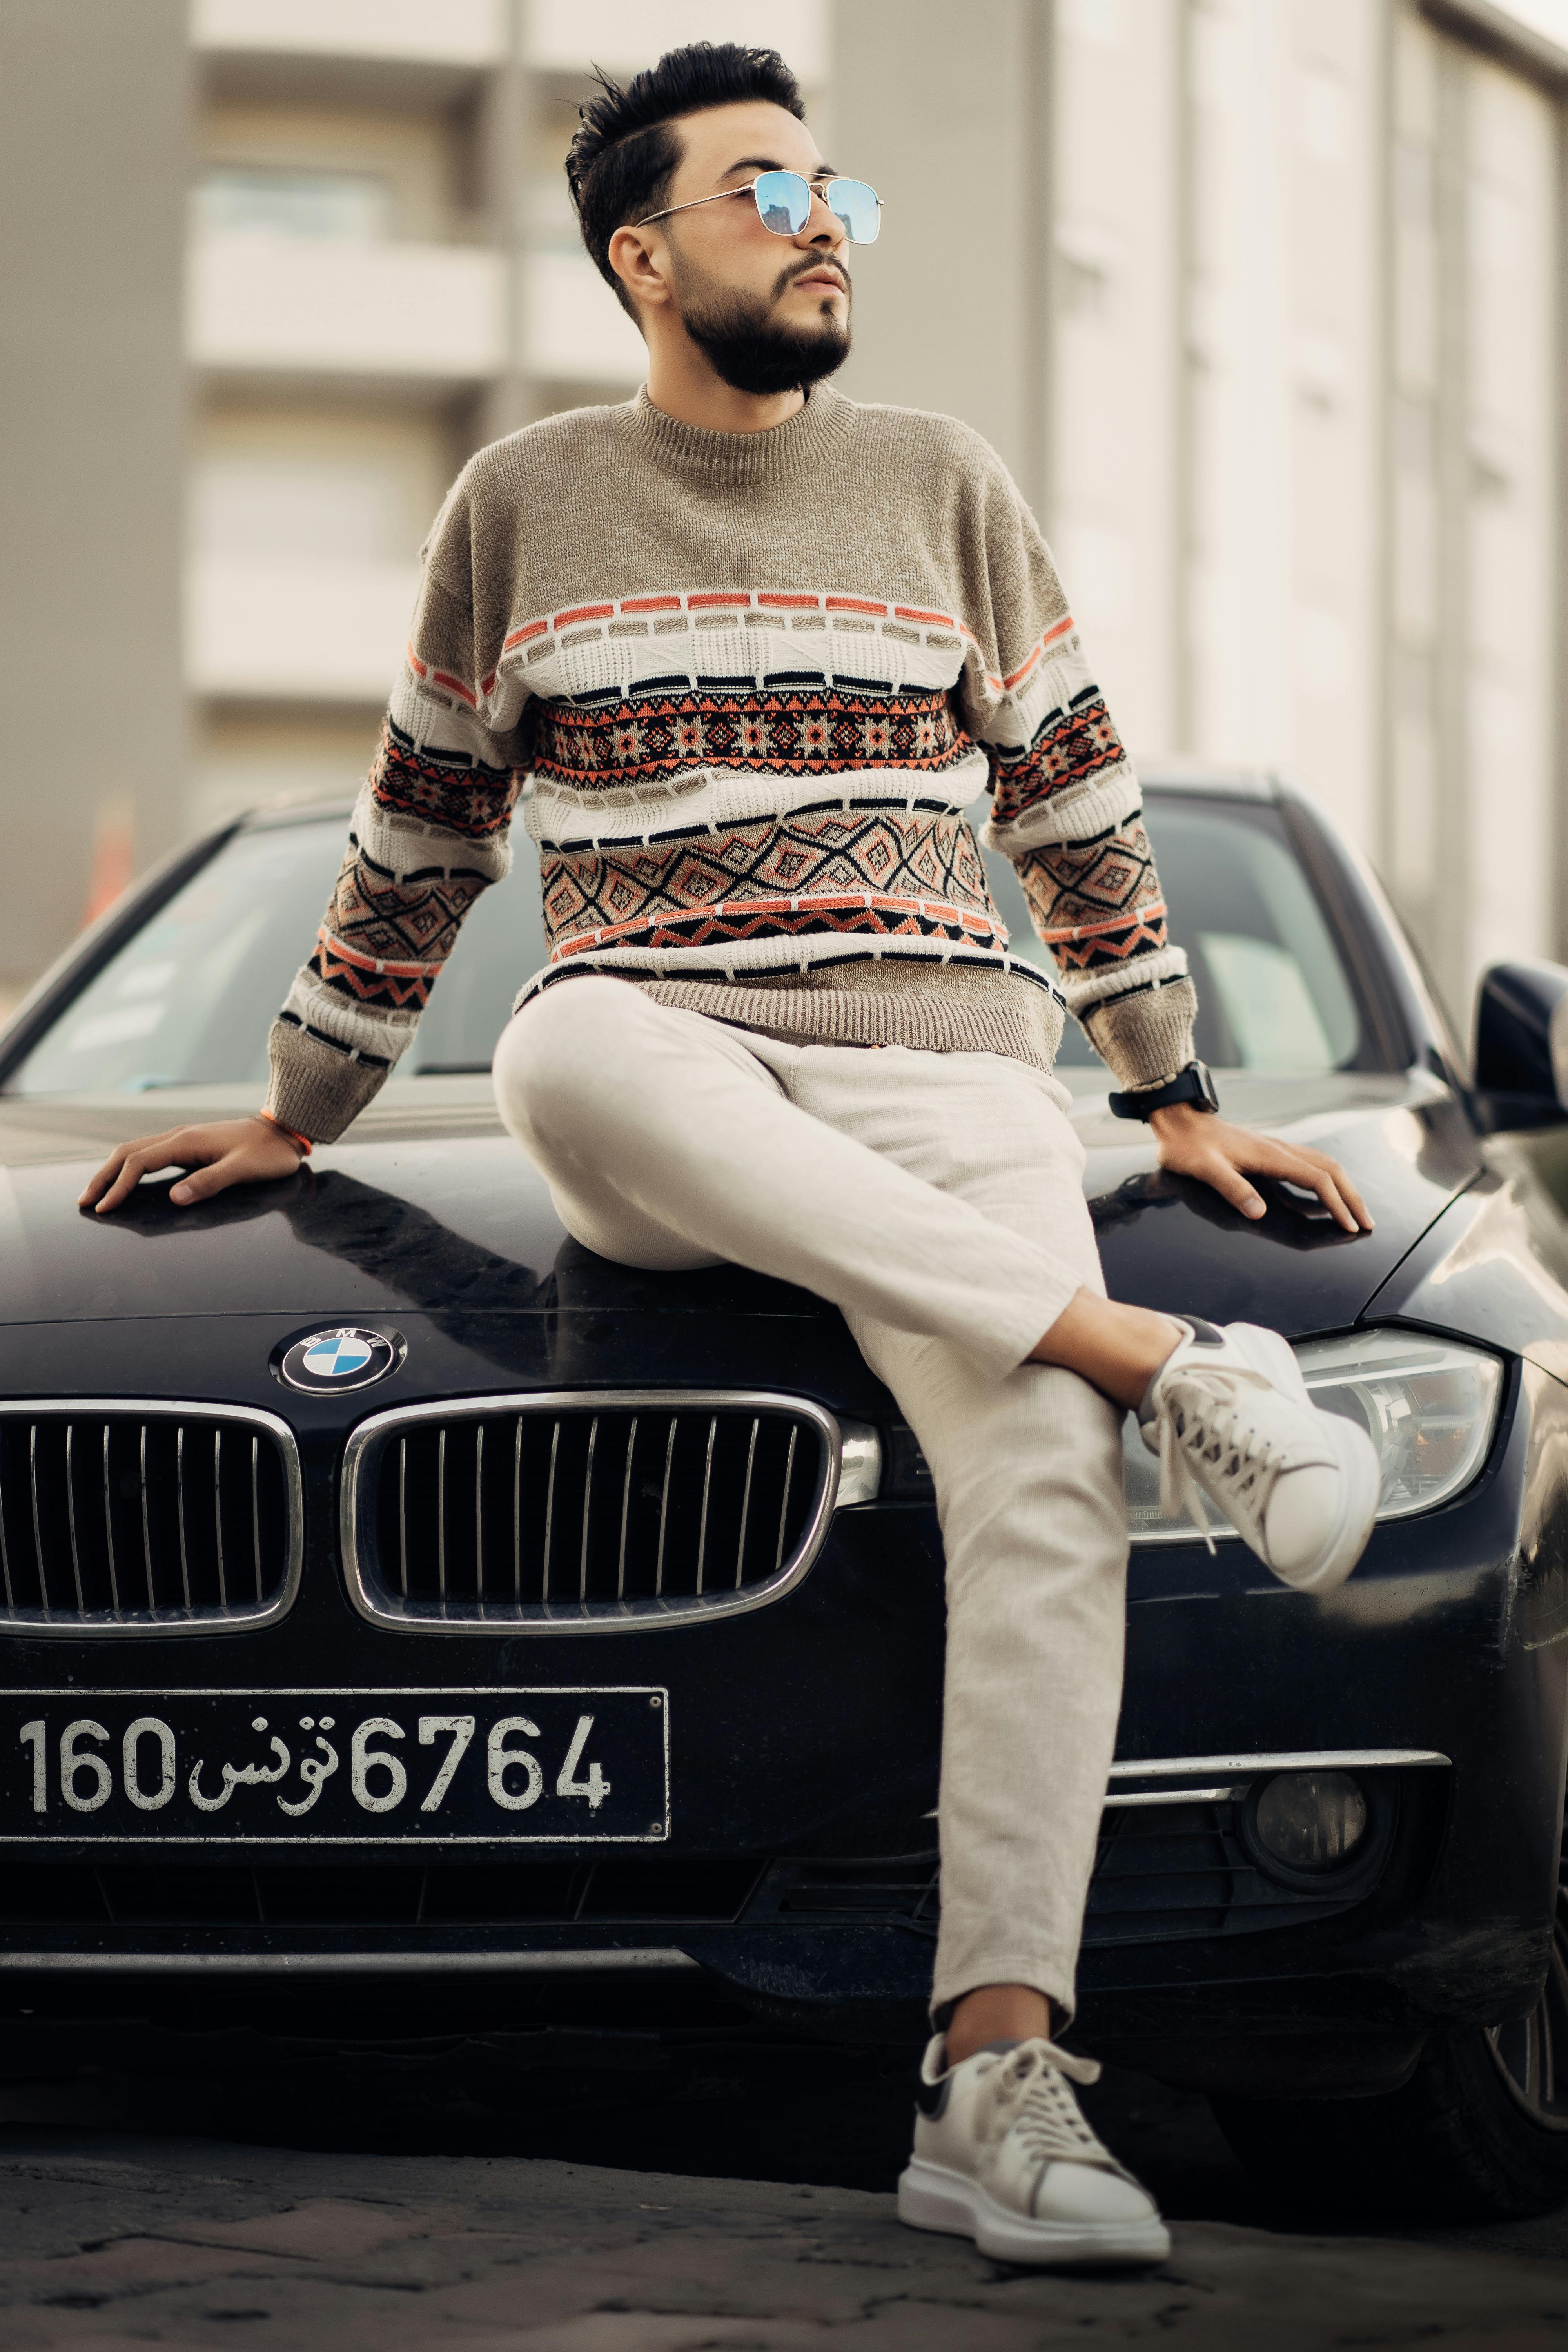 Guests Pose Photo Bmw Cars During Editorial Stock Photo - Stock Image |  Shutterstock Editorial